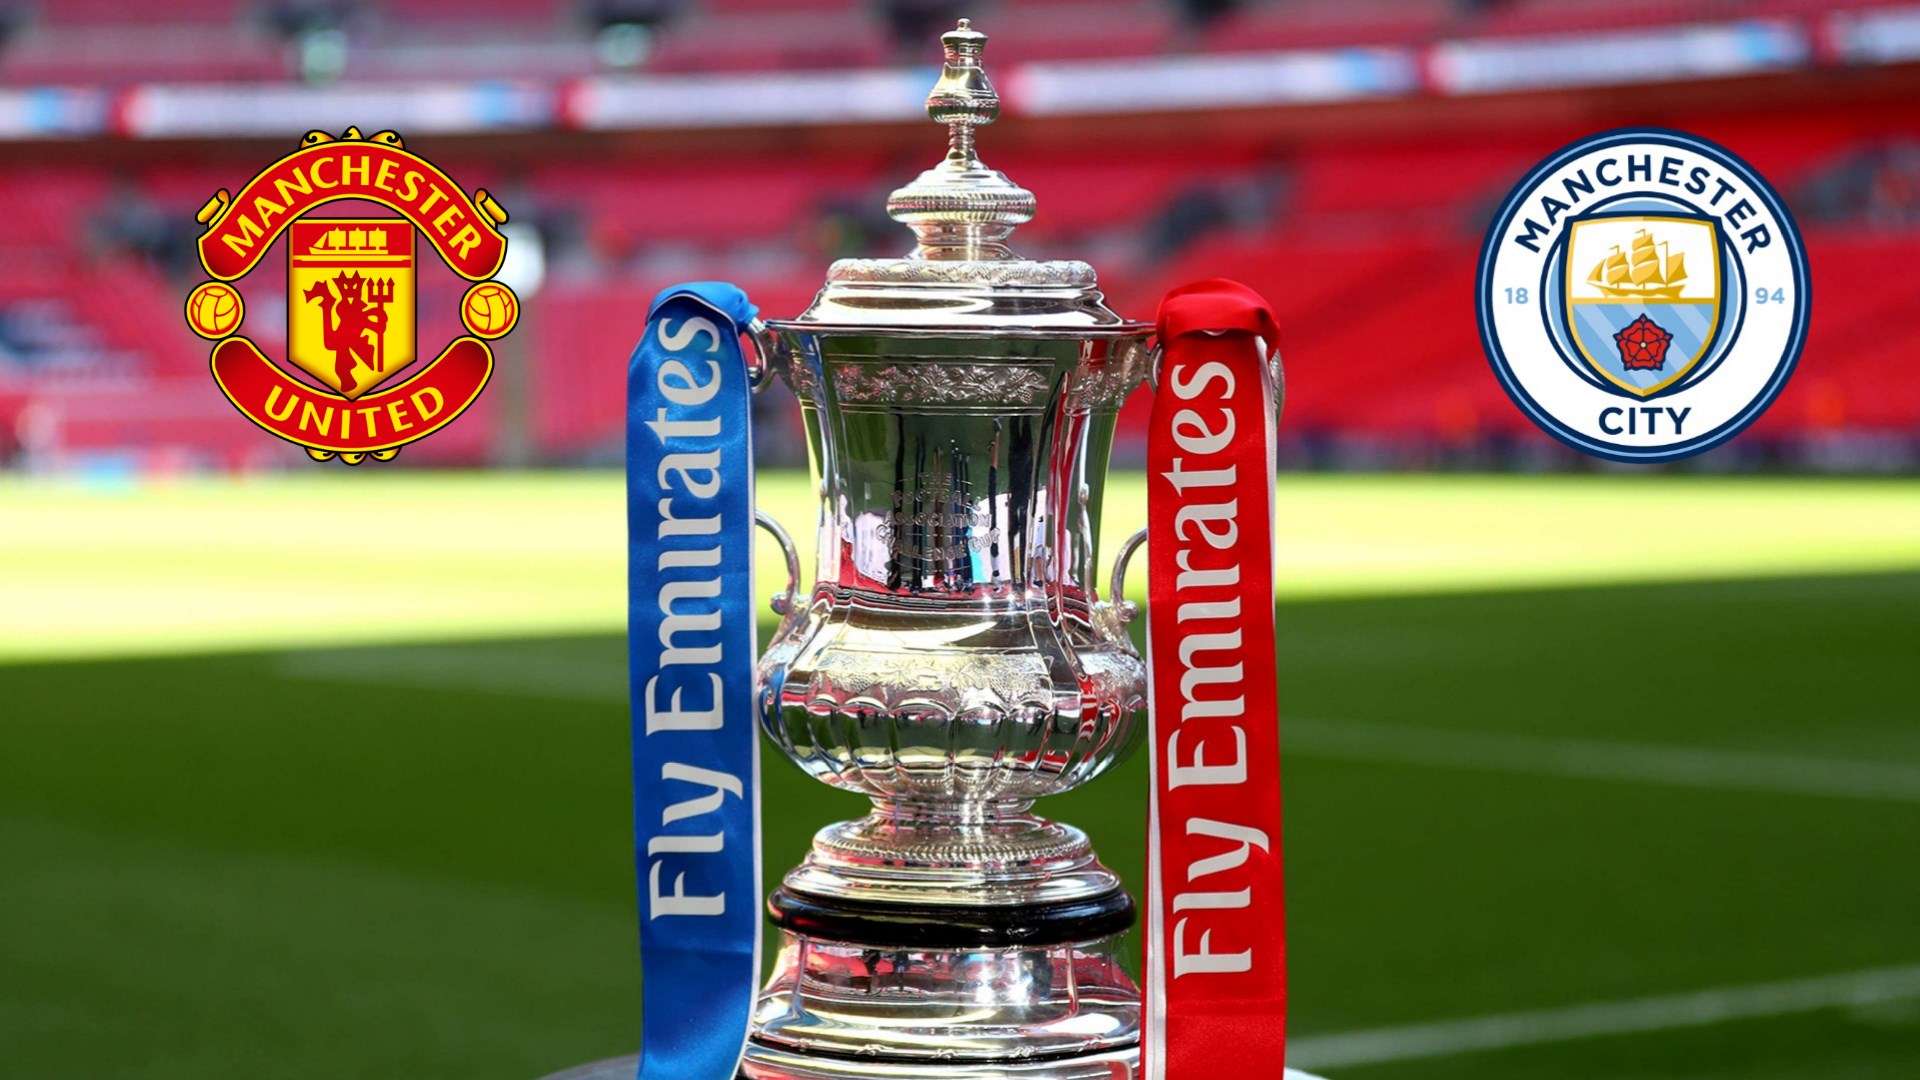 FA Cup Trophy, Manchester City, Manchester United GFX